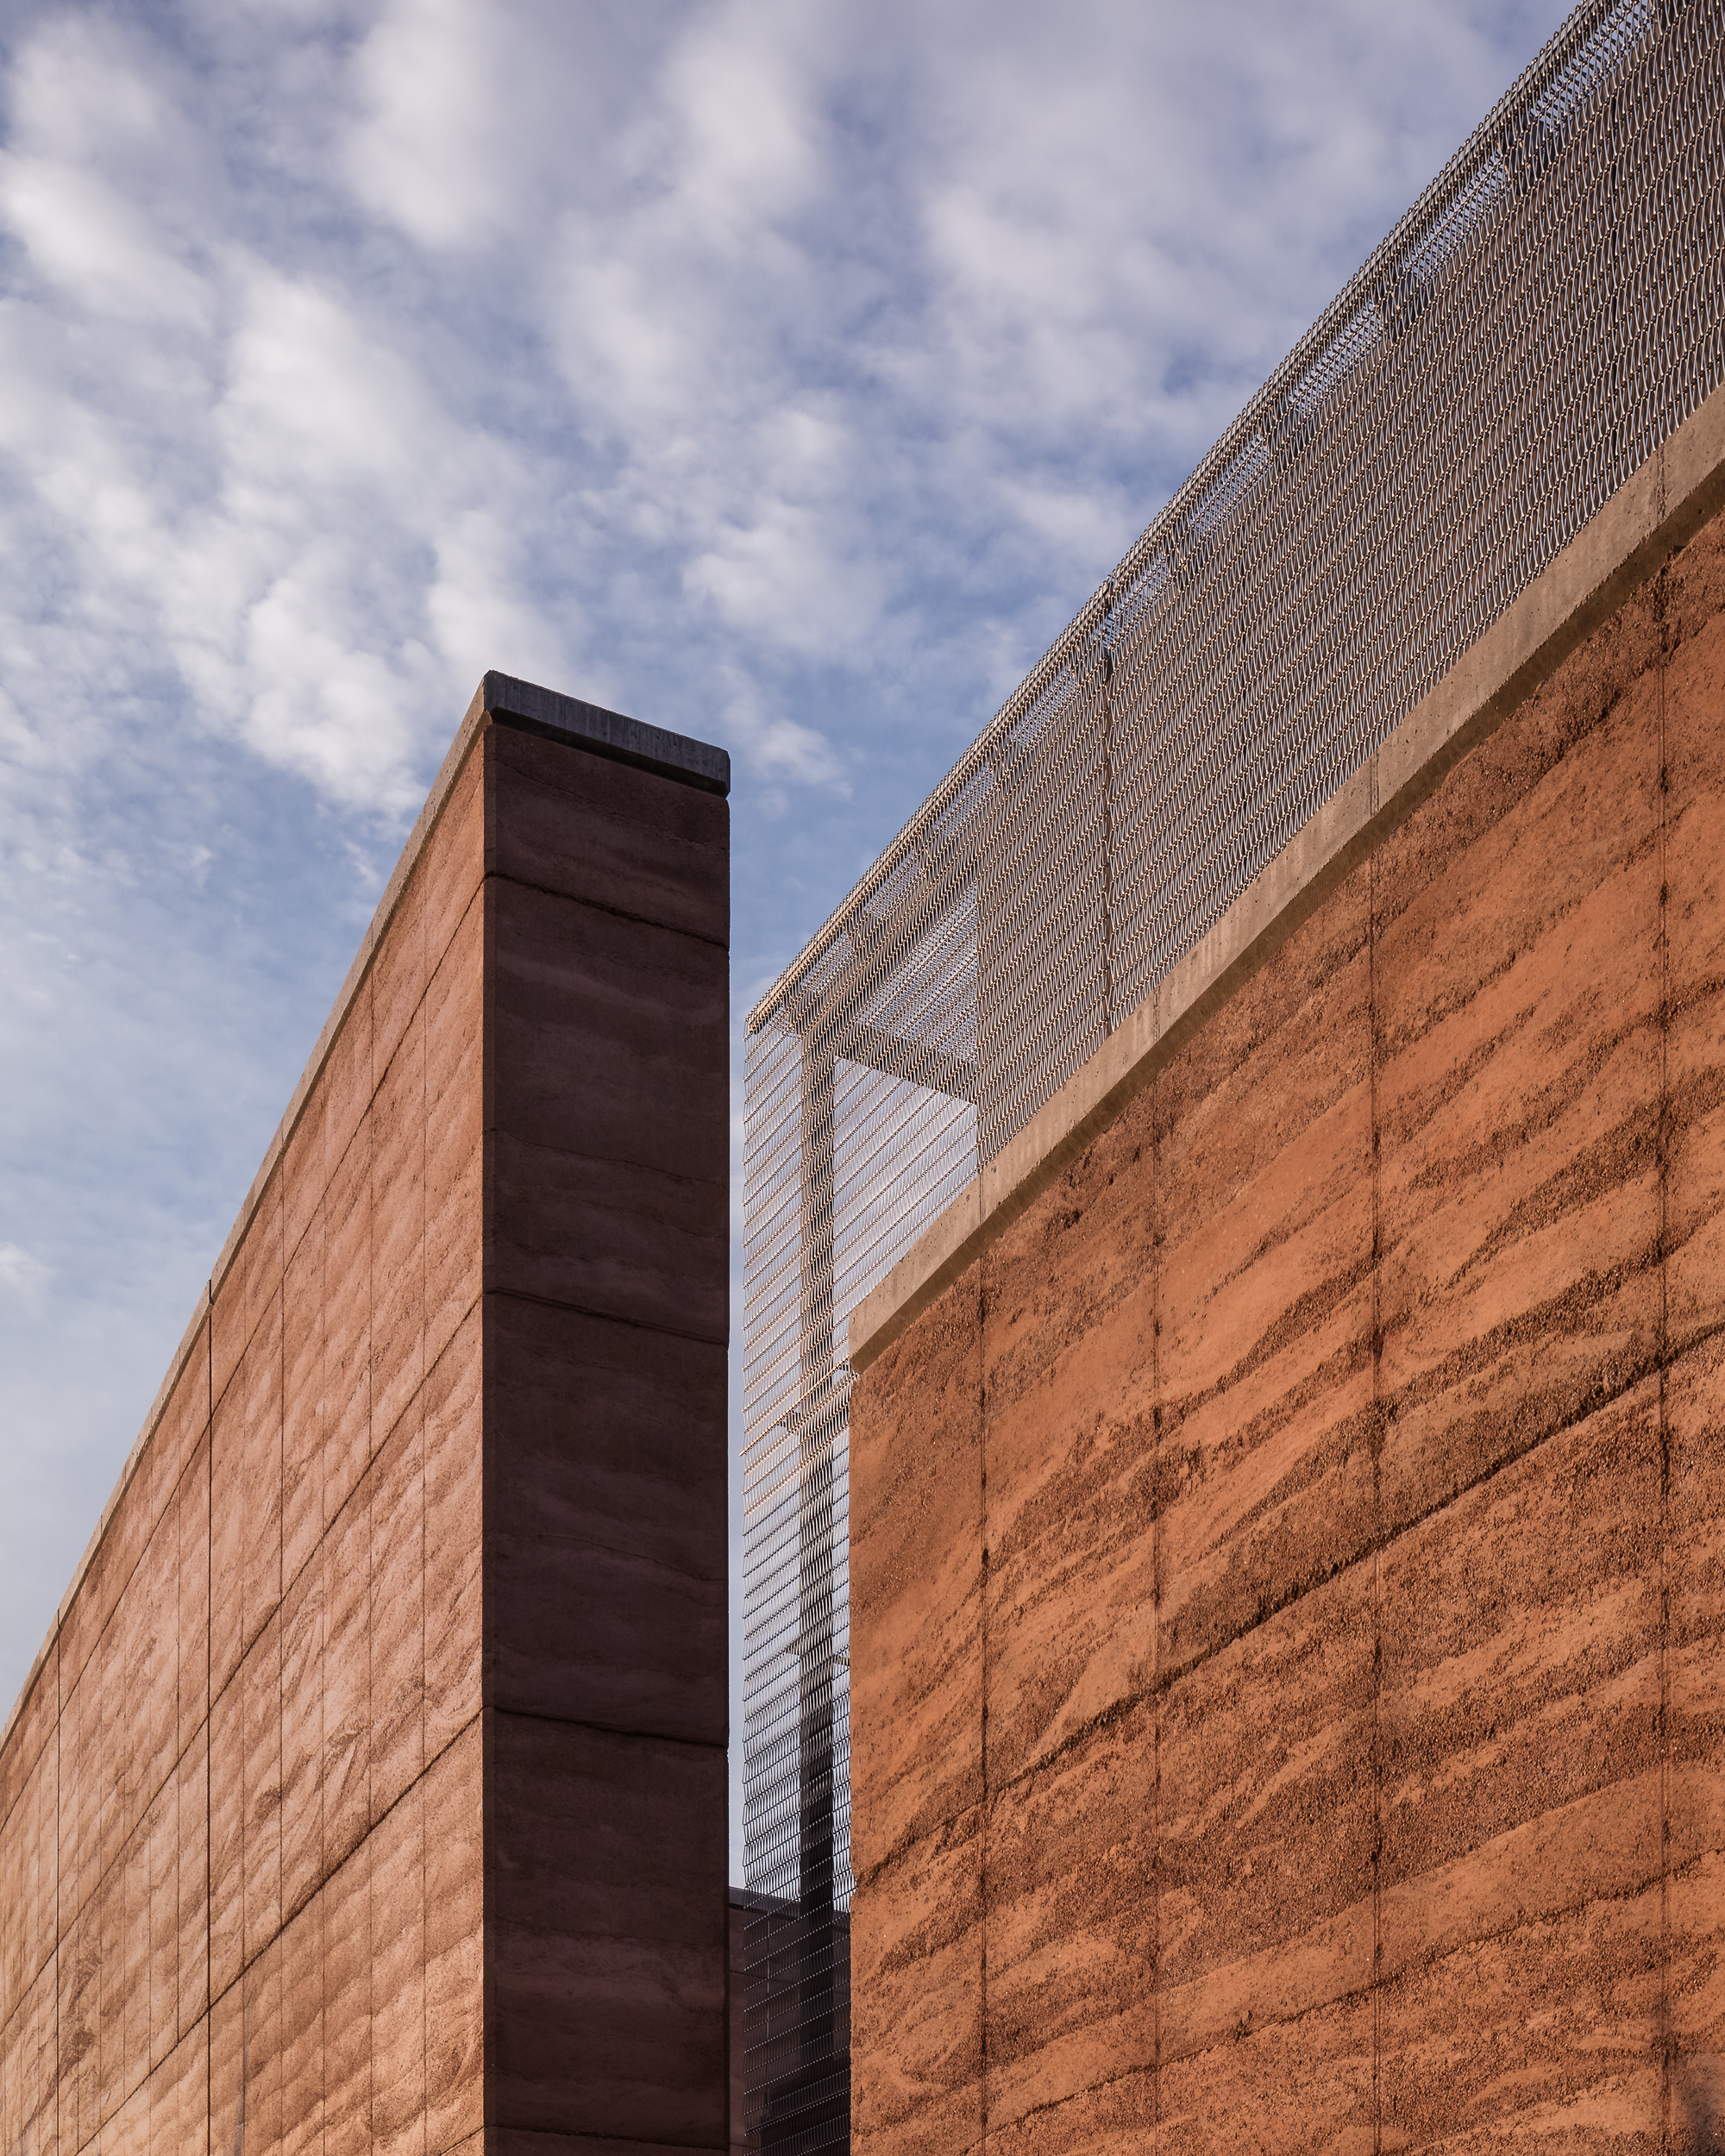 Rammed Earth Wall in Residential Structure - Architectural Photographer Michael Tessler.jpg